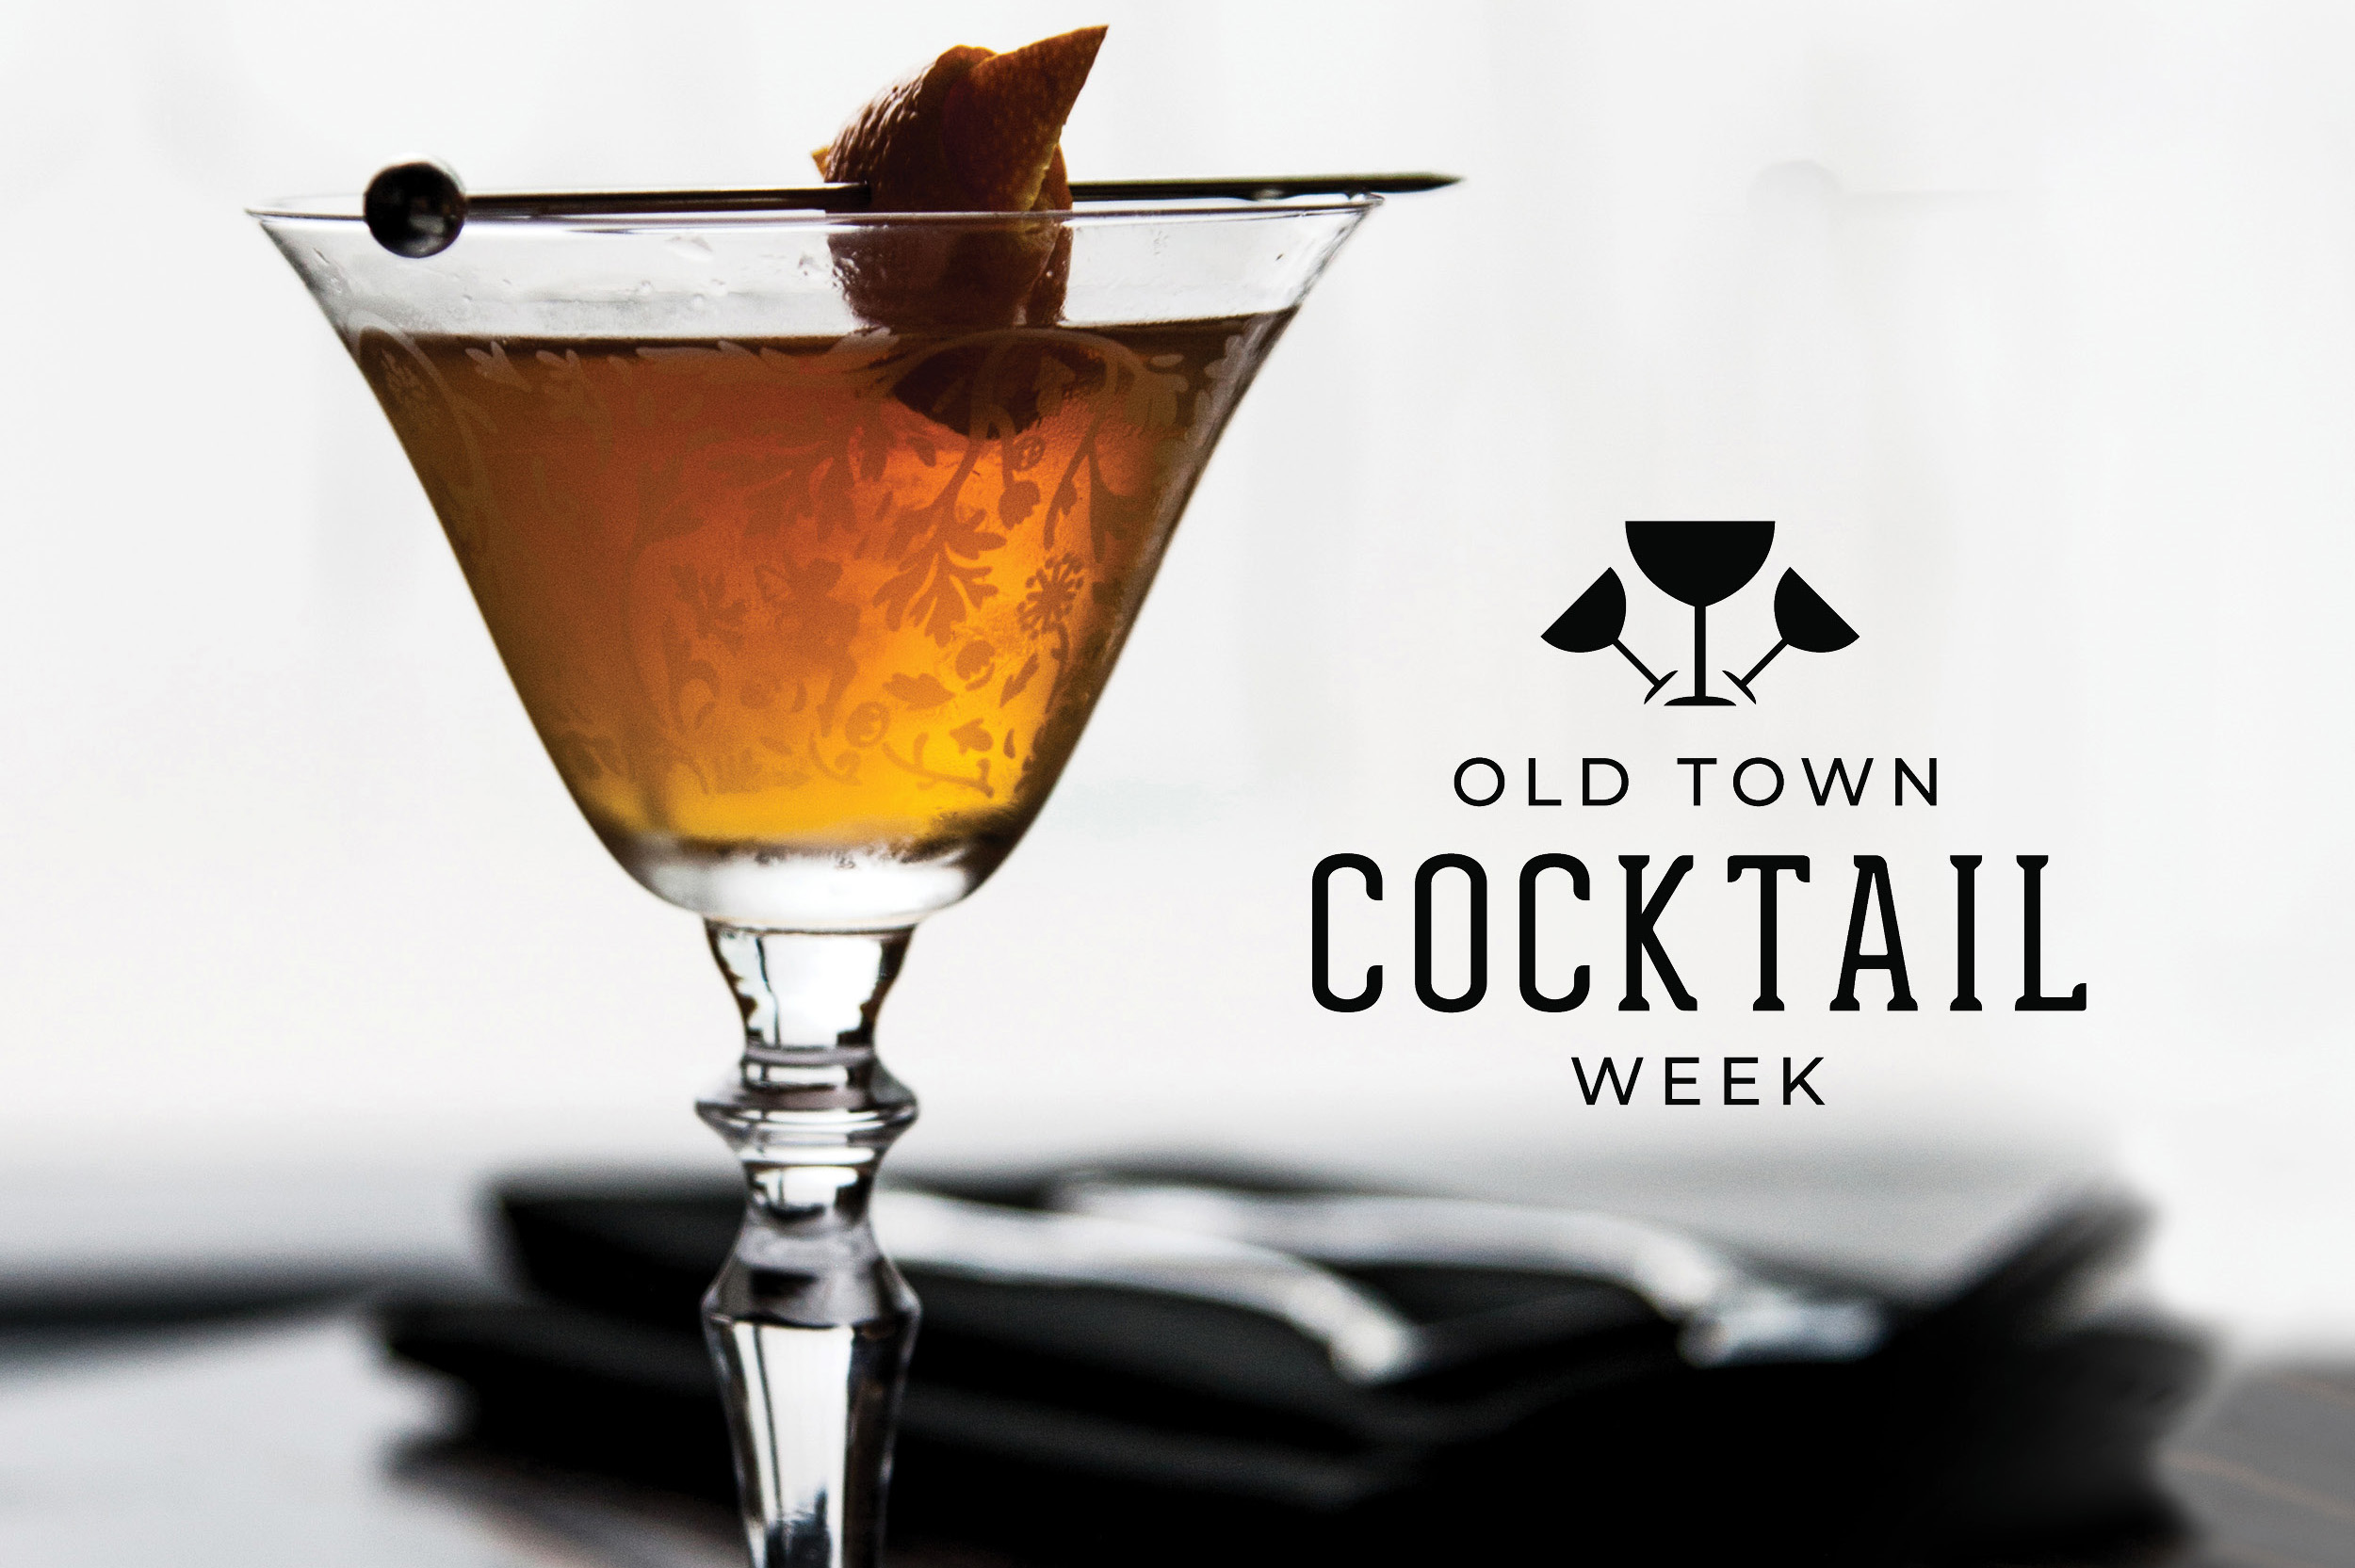 Old Town Cocktail Week: Meet the Makers at Market Square